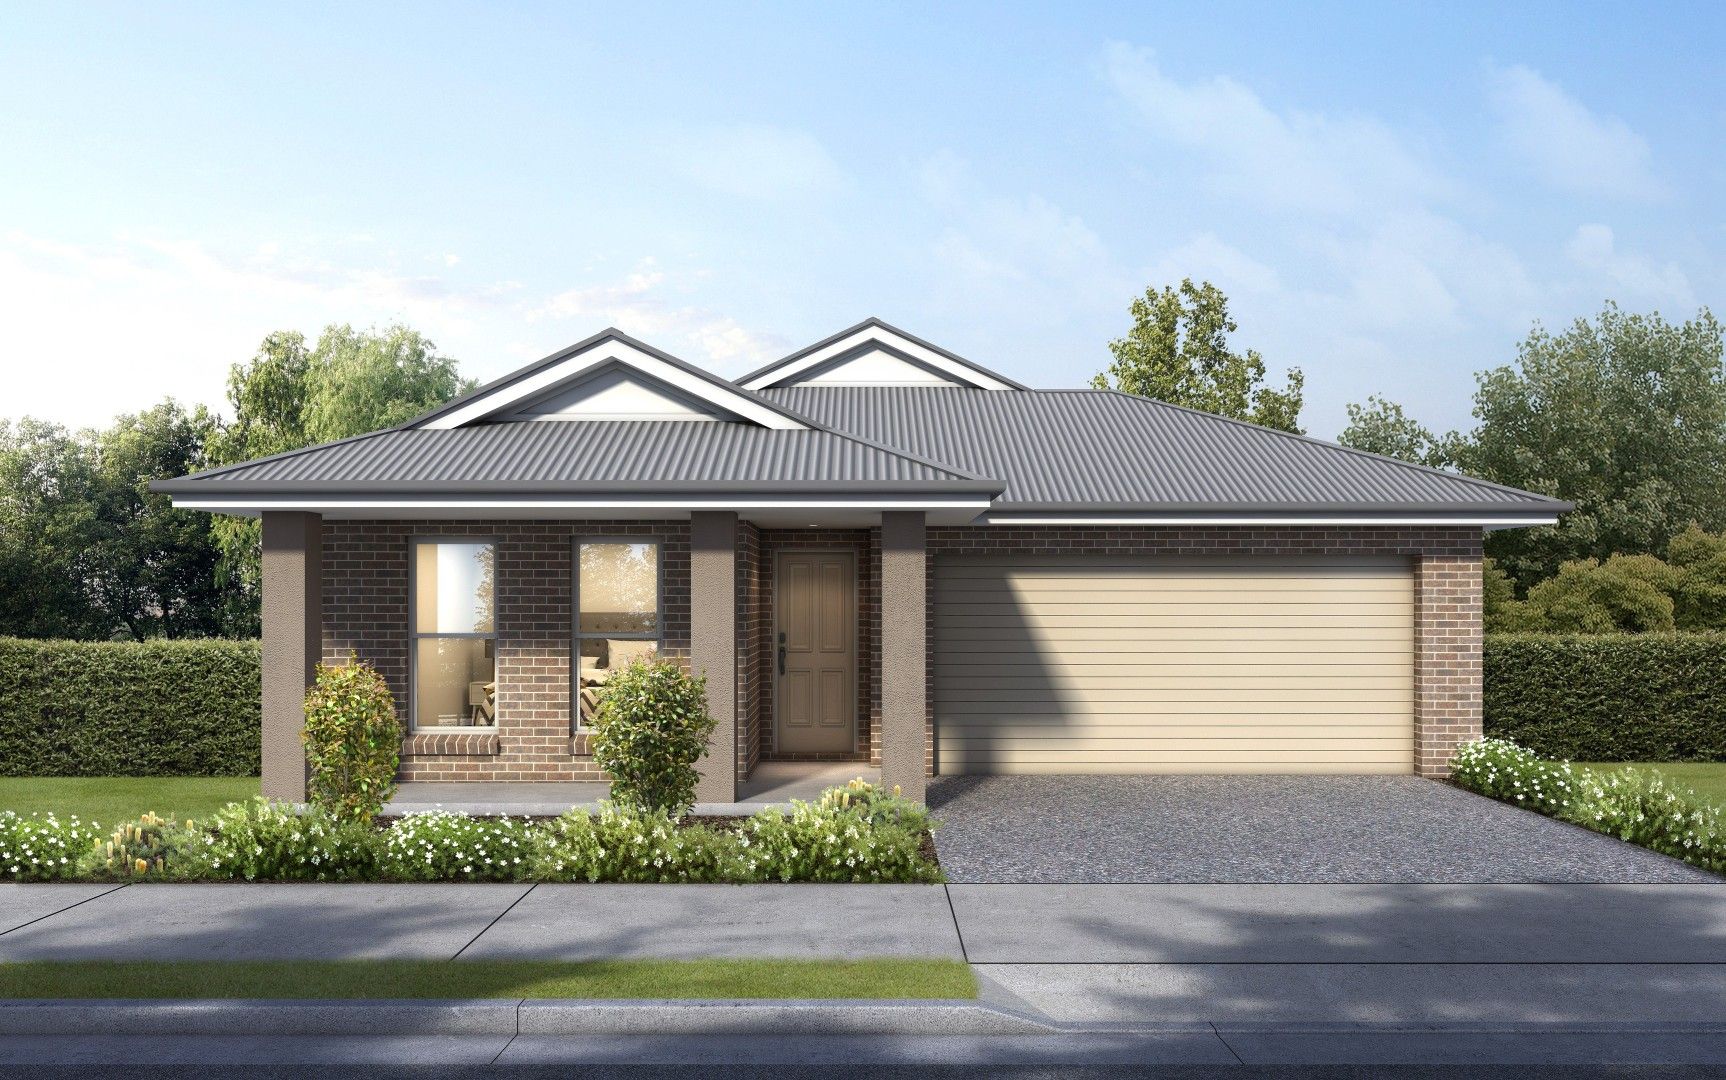 4 bedrooms New House & Land in Lot 2031 Giovanni Street ORAN PARK NSW, 2570